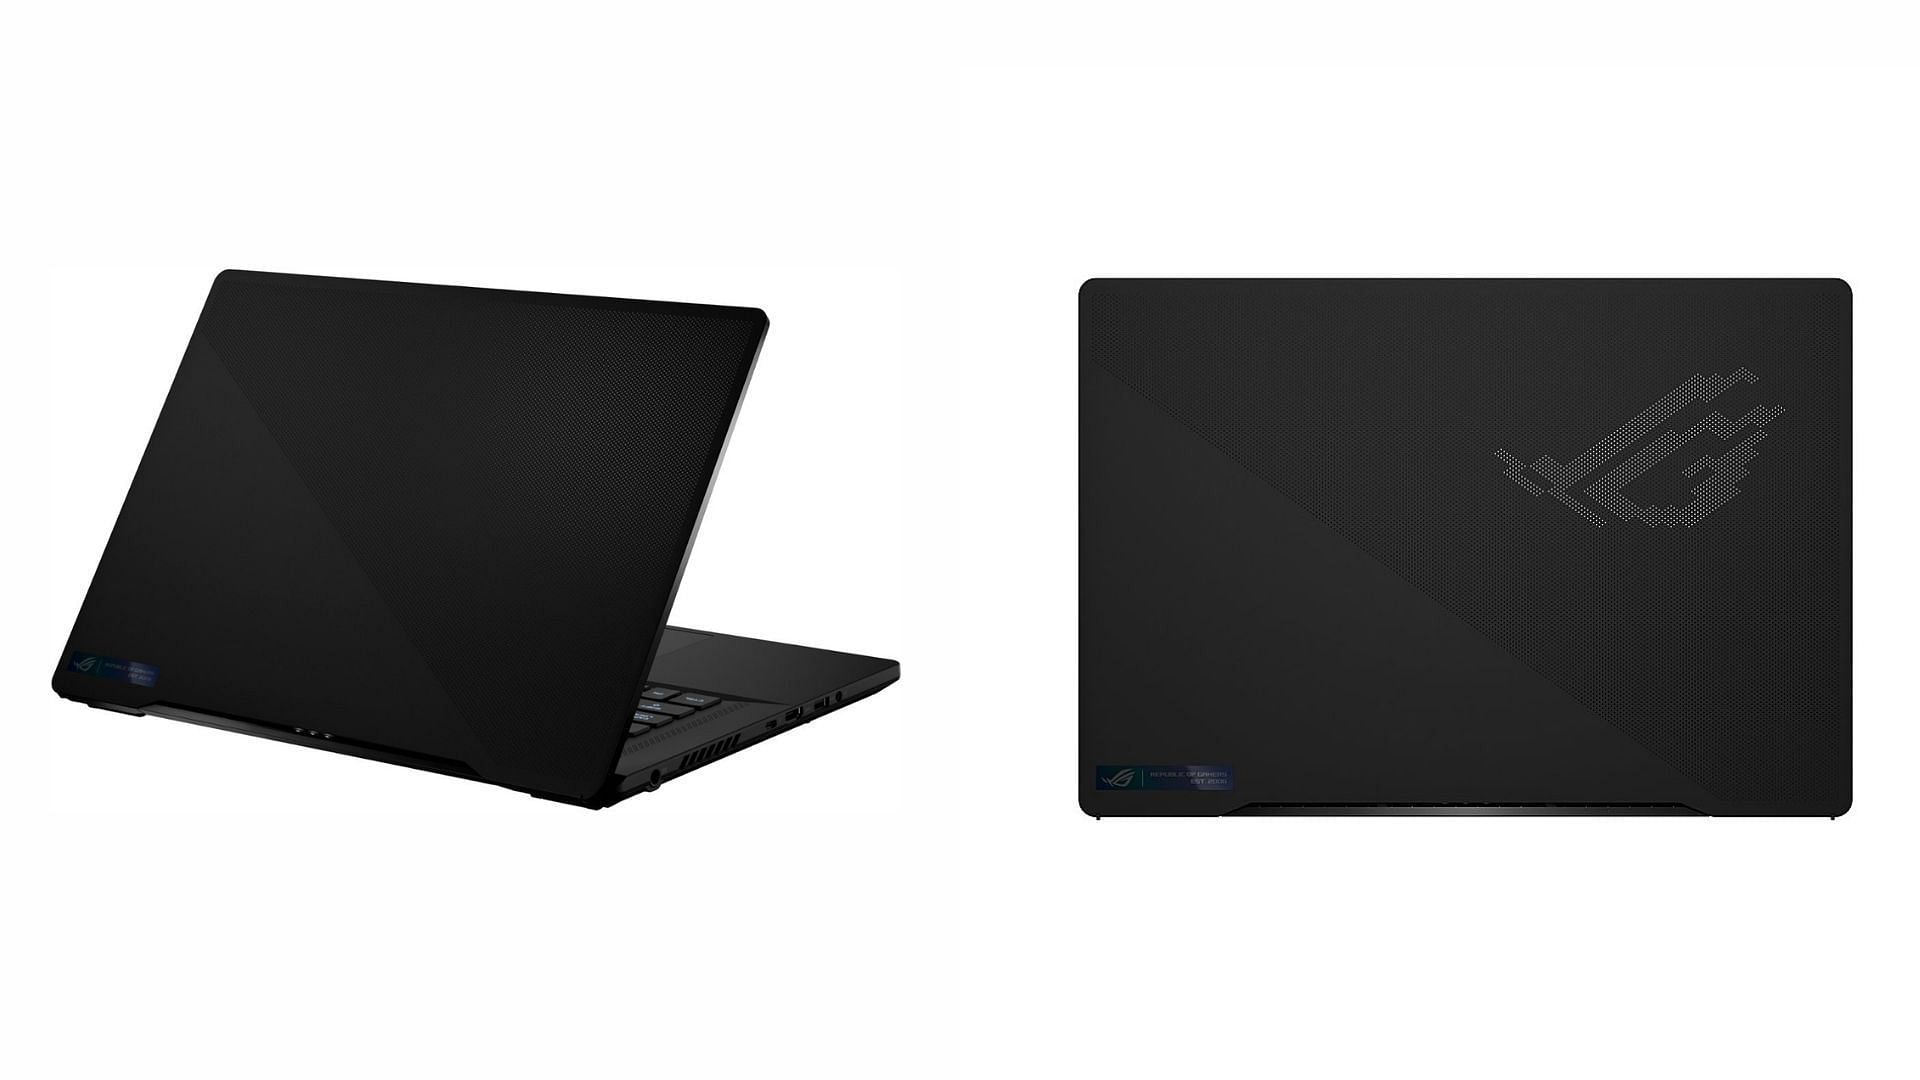 Both Flow X16 and Zephyrus M16 sport very similar specifications. (Image via Asus / Best Buy)